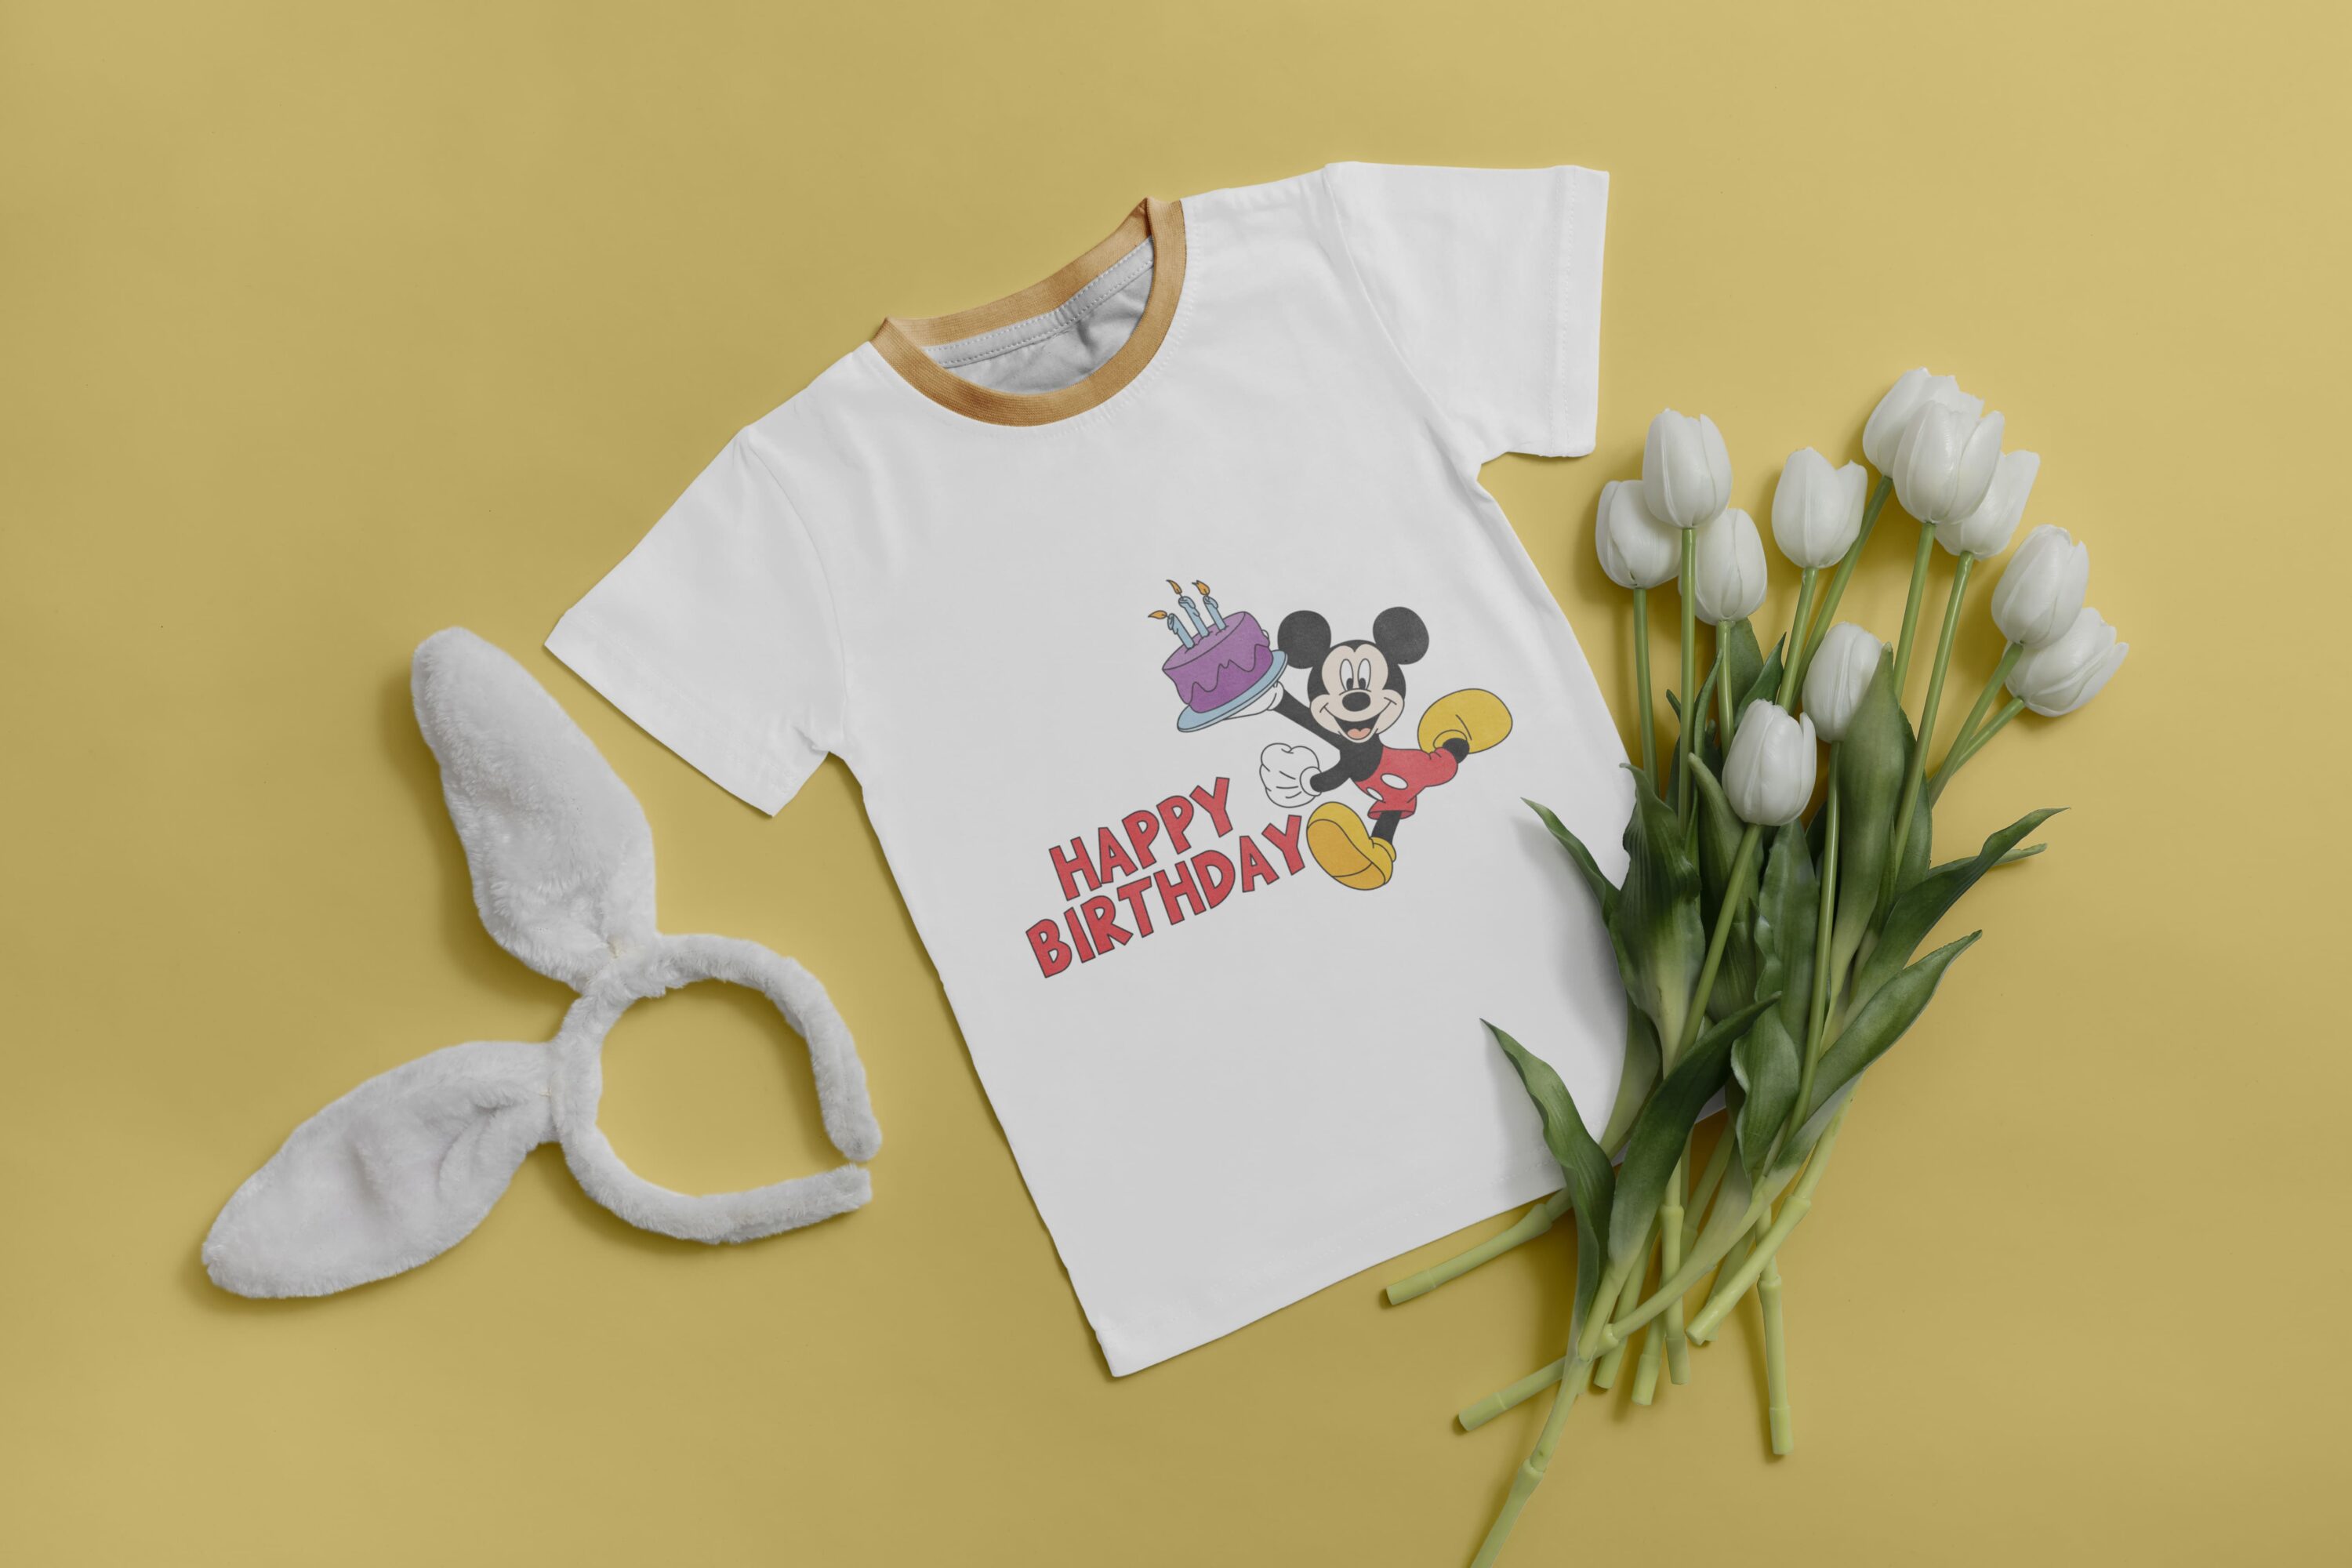 Kid's white t-shirt with the Happy birthday lettering with the festive Mickey Mouse.